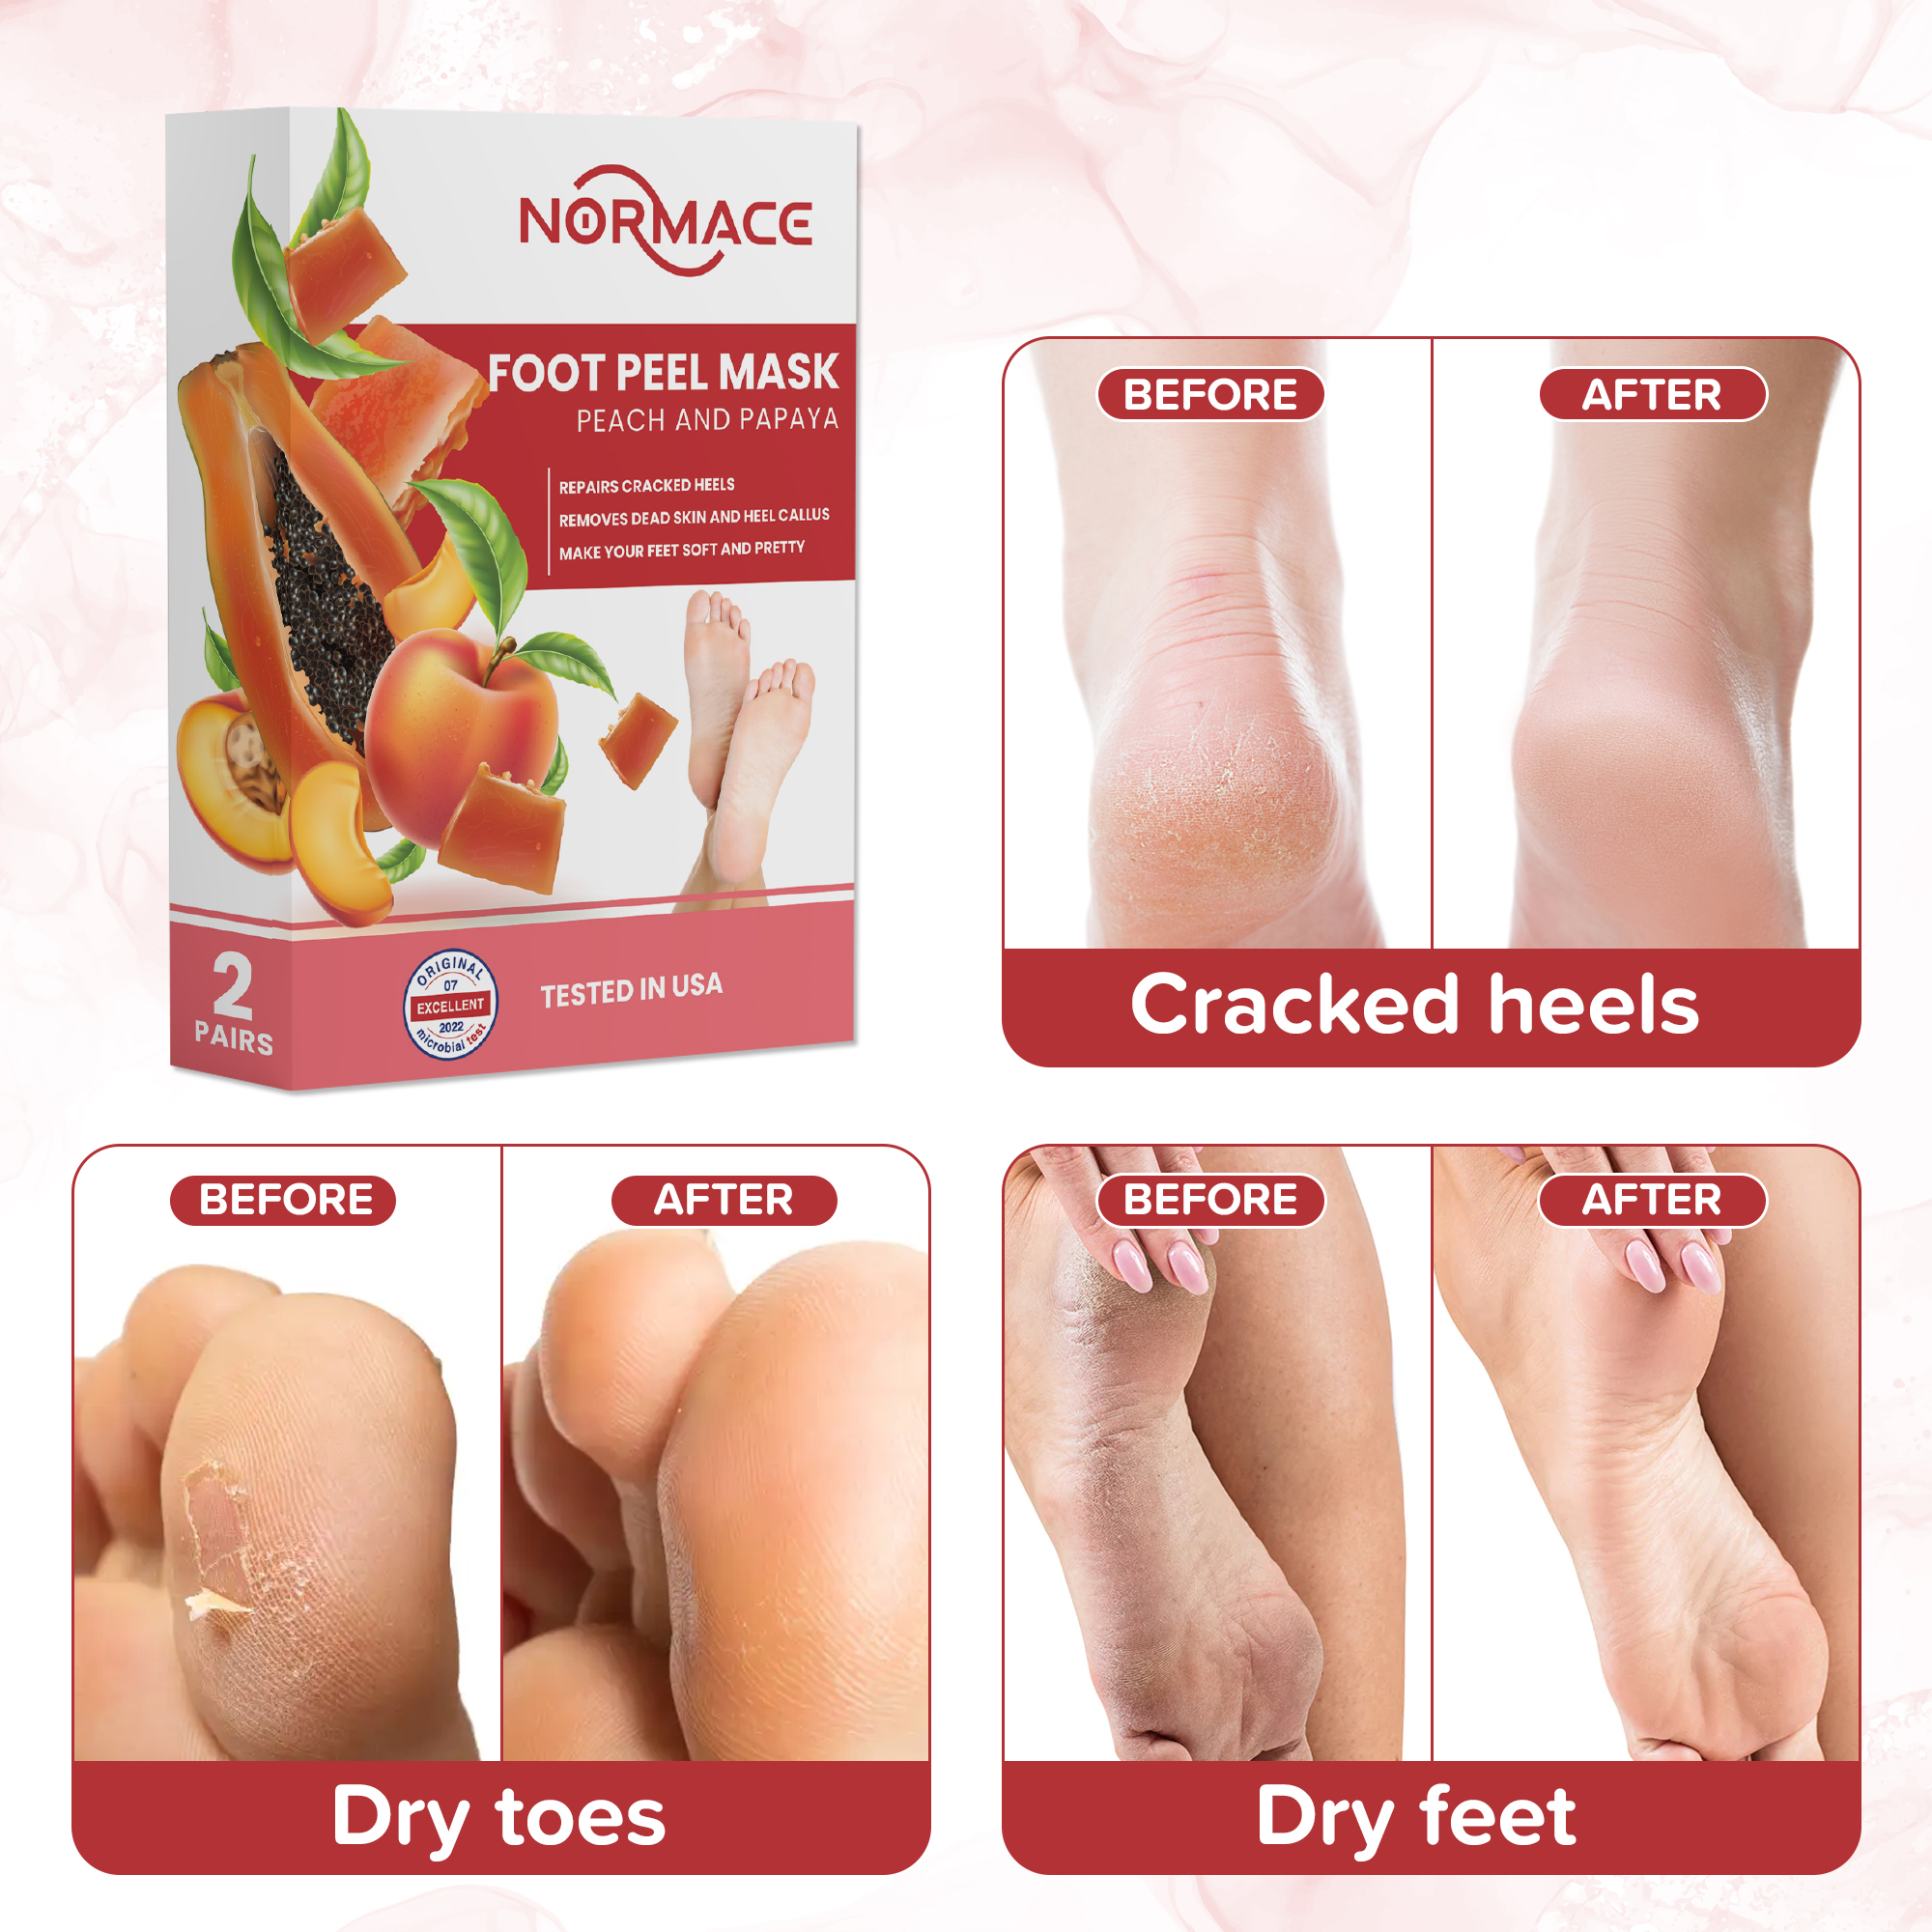 Foot Peel Mask with Peach and Papaya by Normace- 2 Pairs Exfoliating Foot Mask Microbial Tested for Dry, Cracked Feet, Callus & removing dead dry skin for soft baby feet.